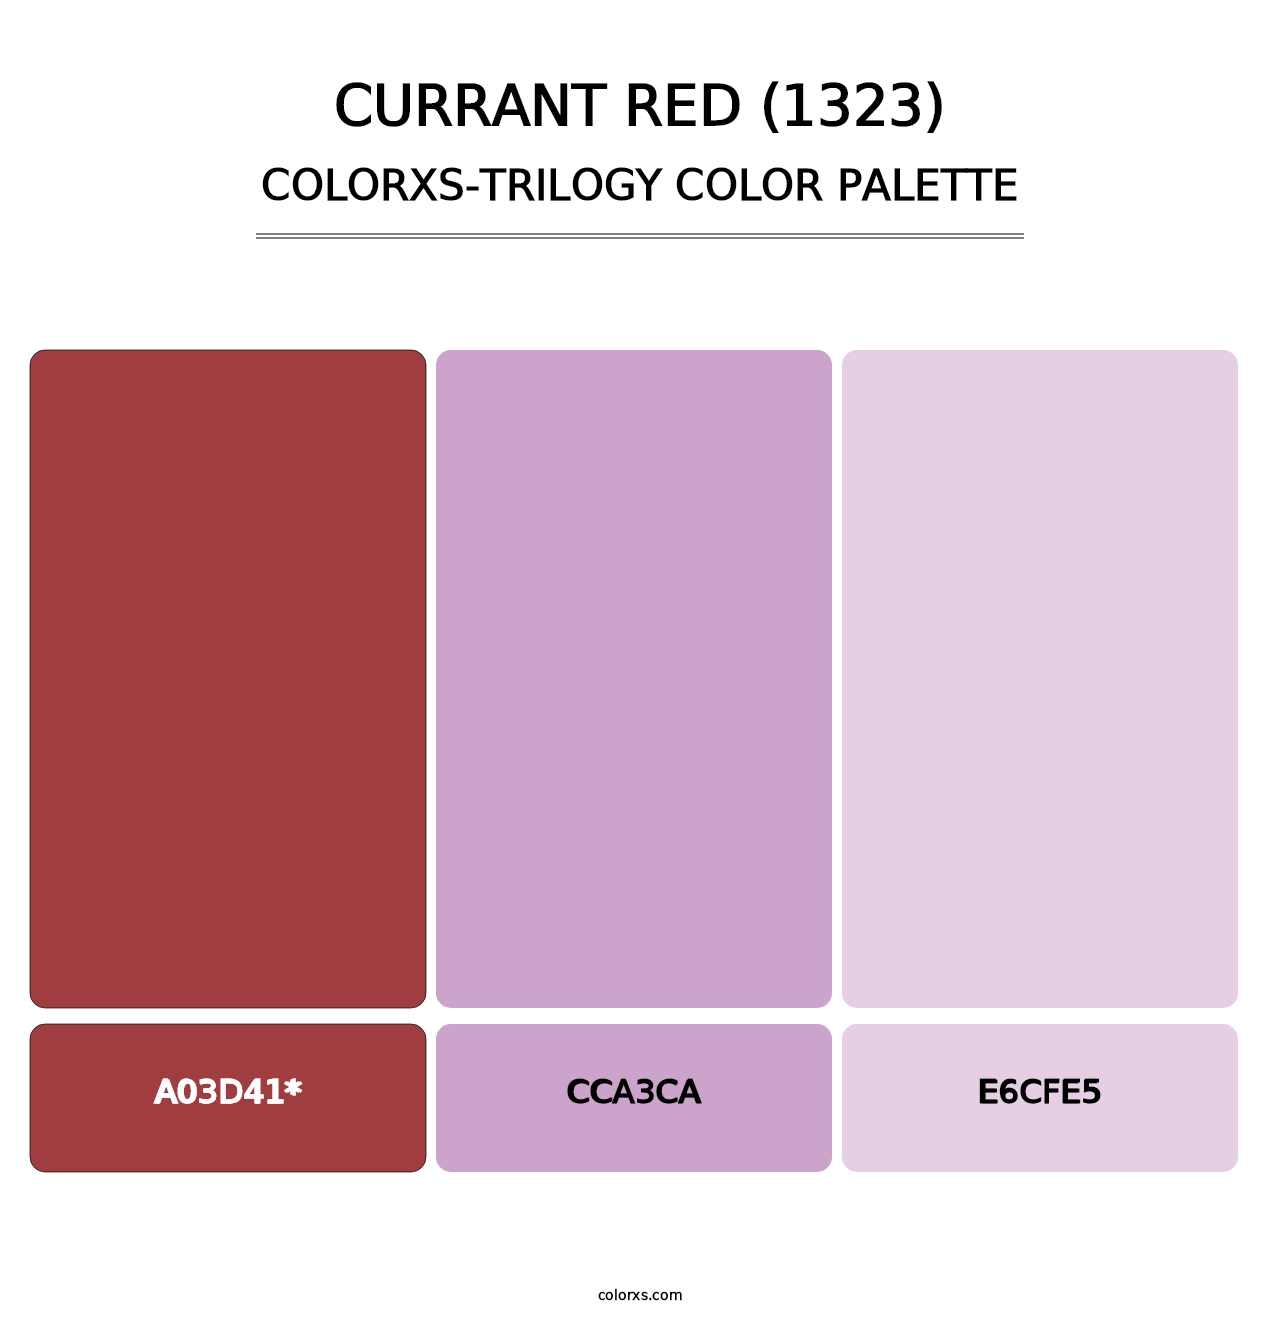 Currant Red (1323) - Colorxs Trilogy Palette